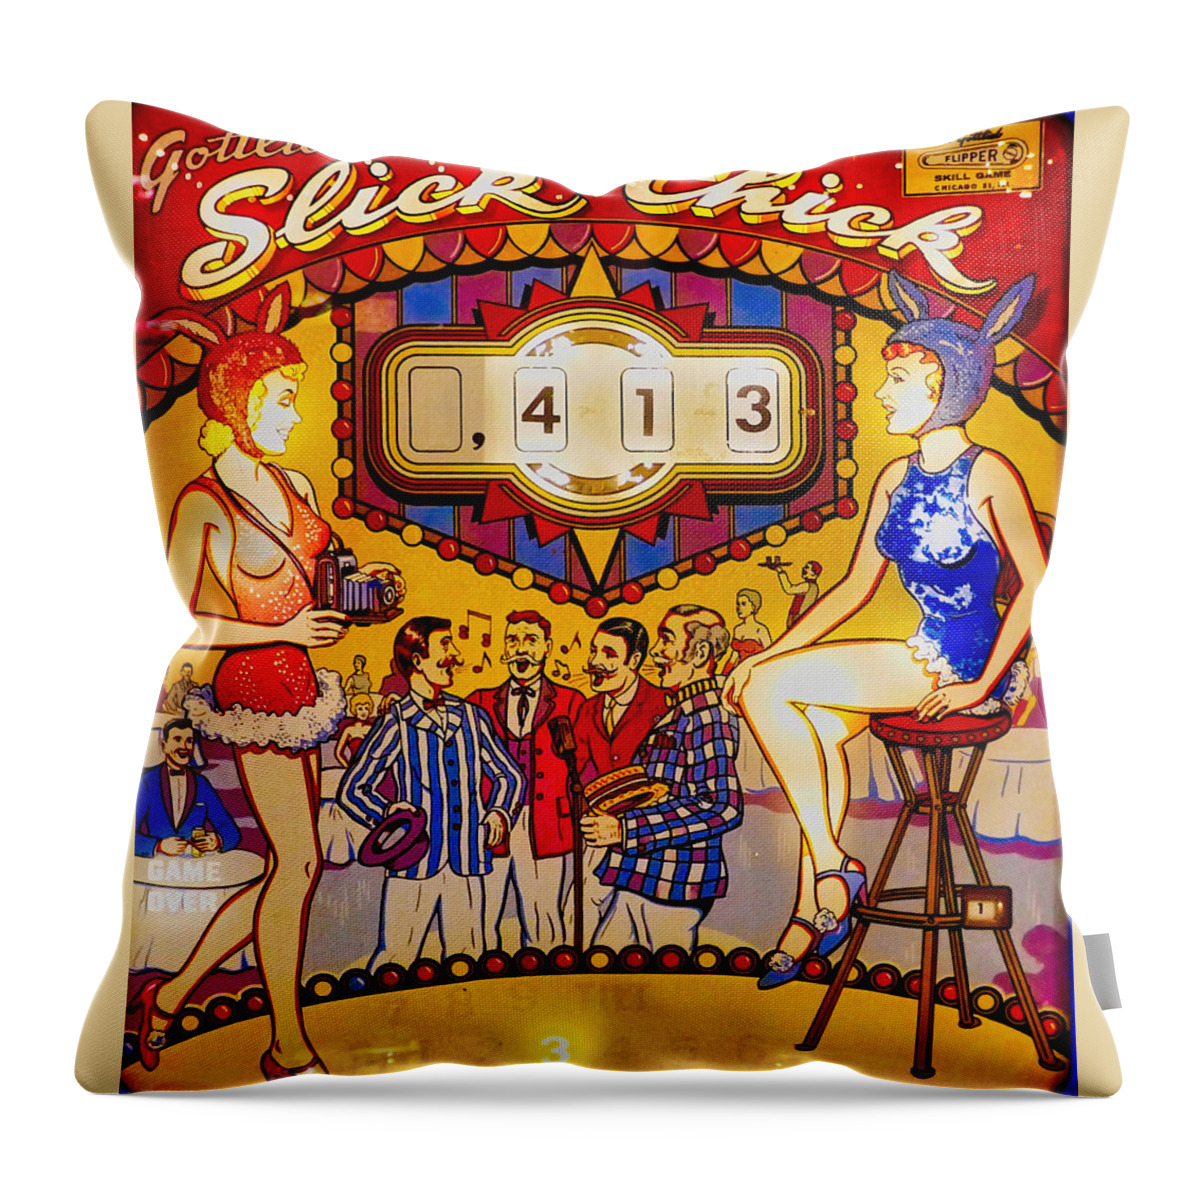 Color Photo Of 1963 Slick Chick Pinball Machine Throw Pillow featuring the photograph 1963 Slick Chick Pinball Machine by Joan Reese